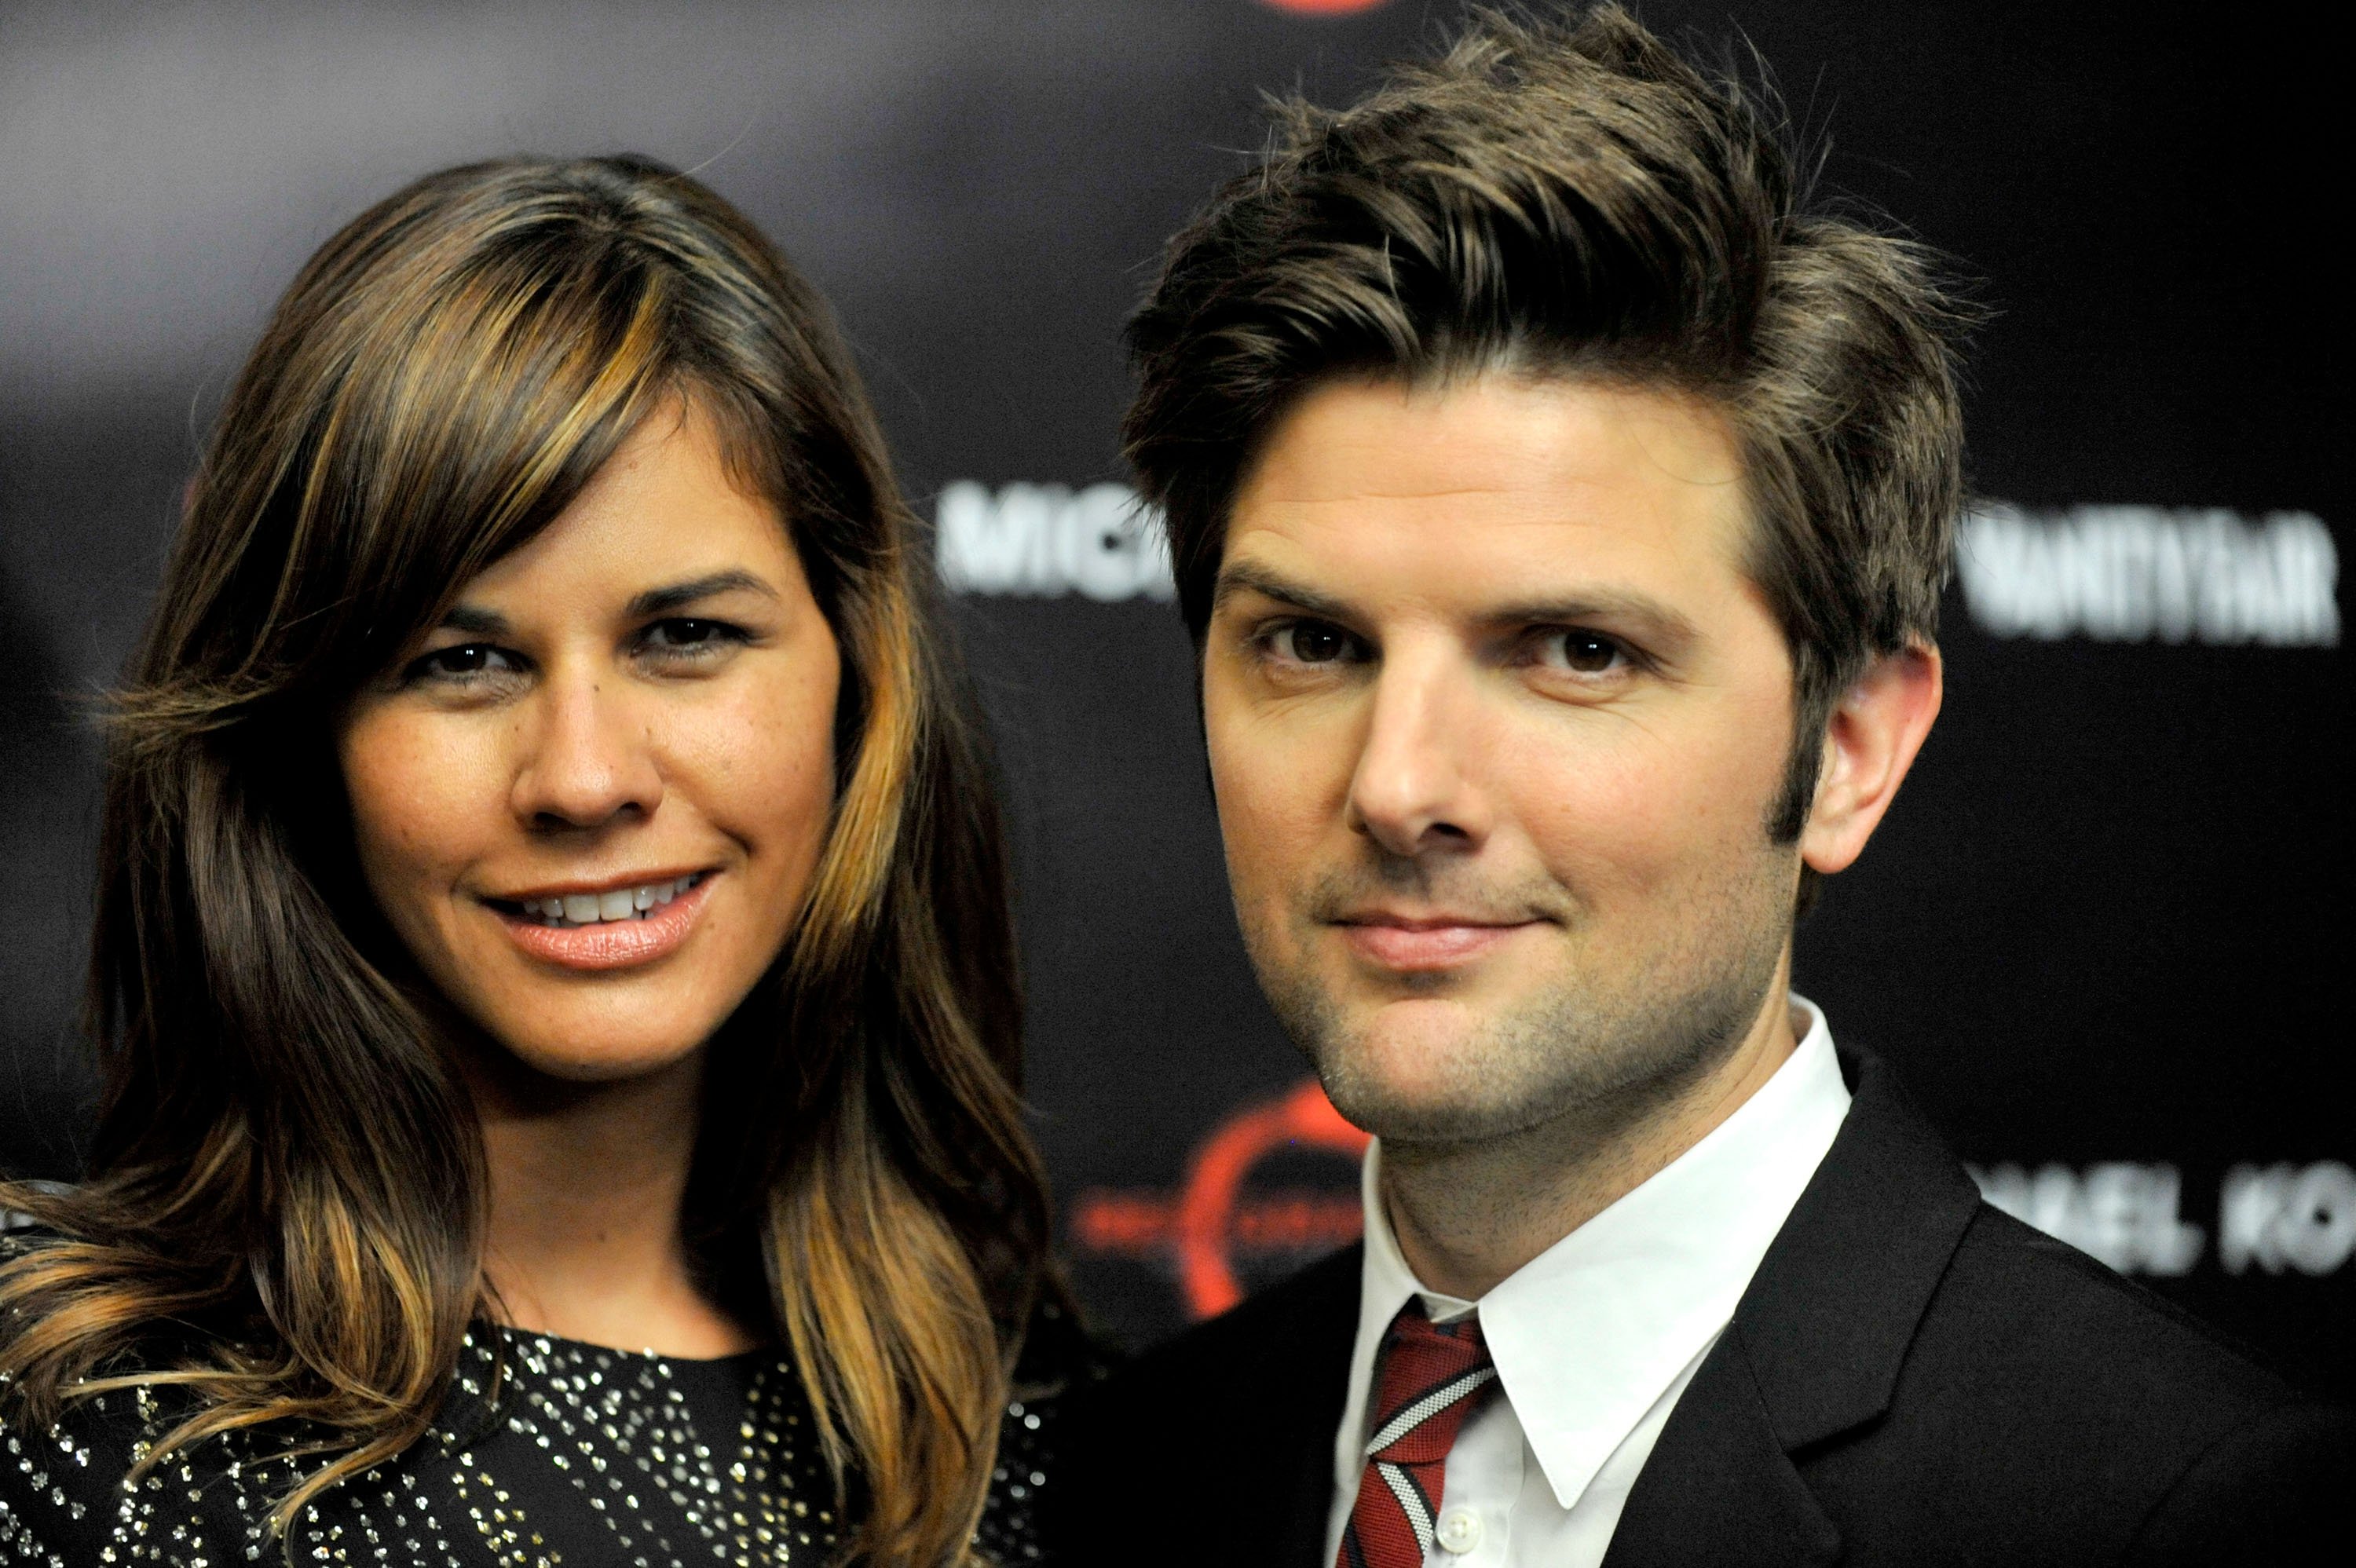 Adam Scott and Naomi Sablan at a "Friends With Kids" reception, at Gardiner Museum in Toronto, Canada on September 9, 2011. | Source: Getty Images